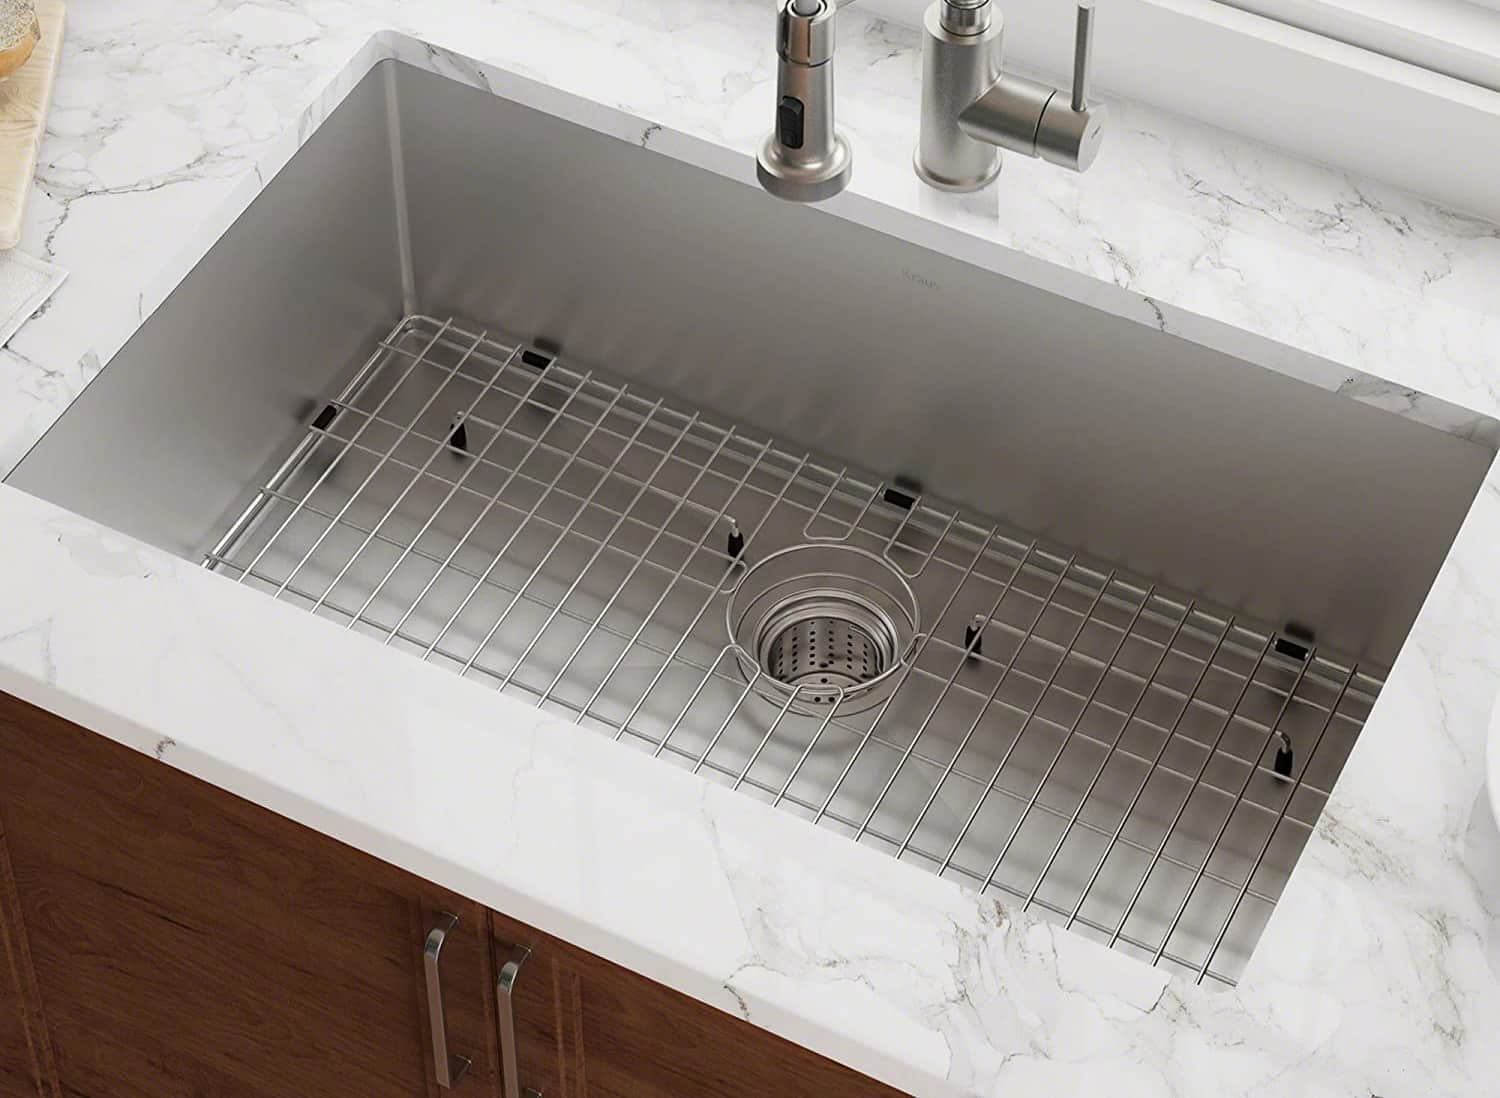 best single bowl kitchen sink drop in stainless